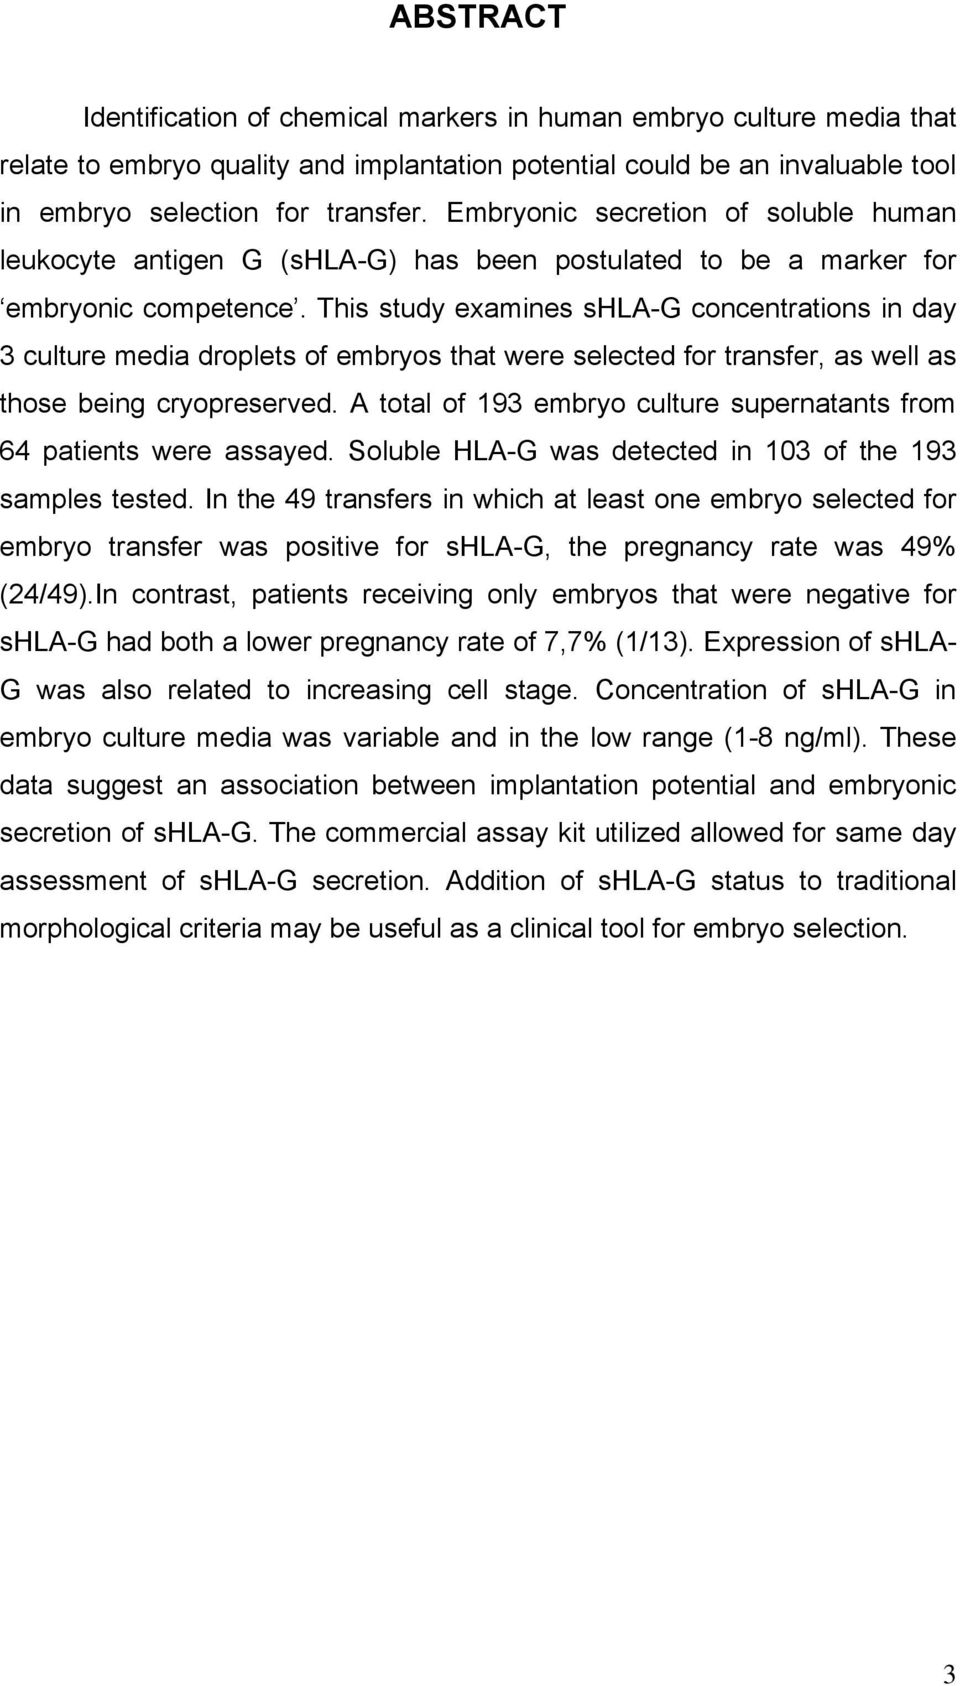 This study examines shla-g concentrations in day 3 culture media droplets of embryos that were selected for transfer, as well as those being cryopreserved.